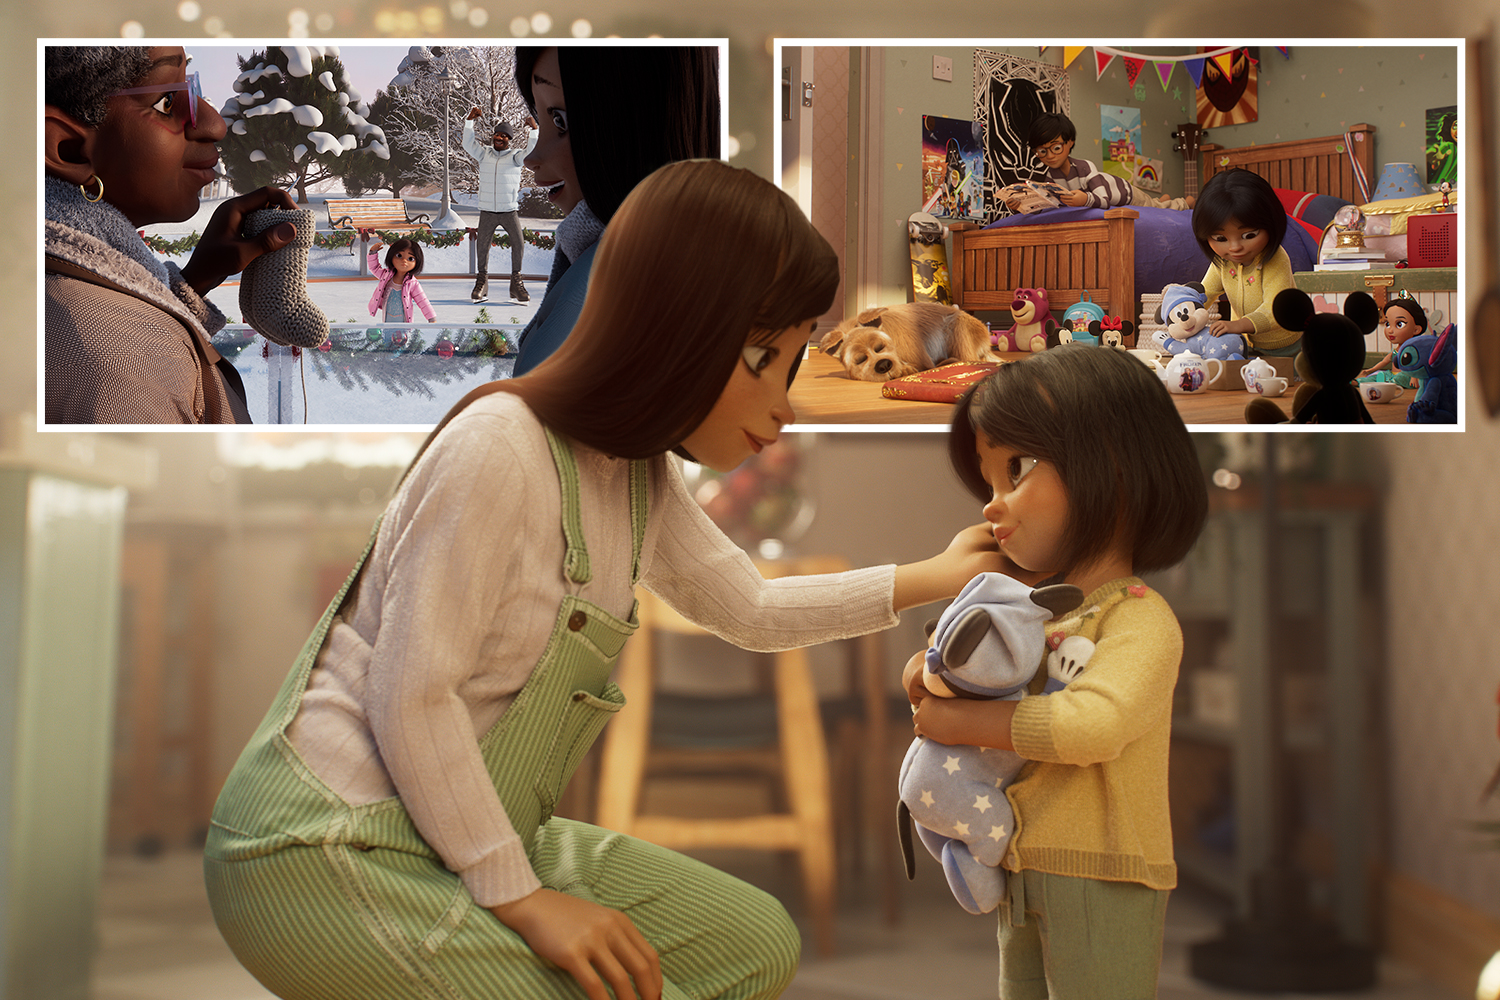 Disney's heartwarming Christmas ad highlights importance of being together